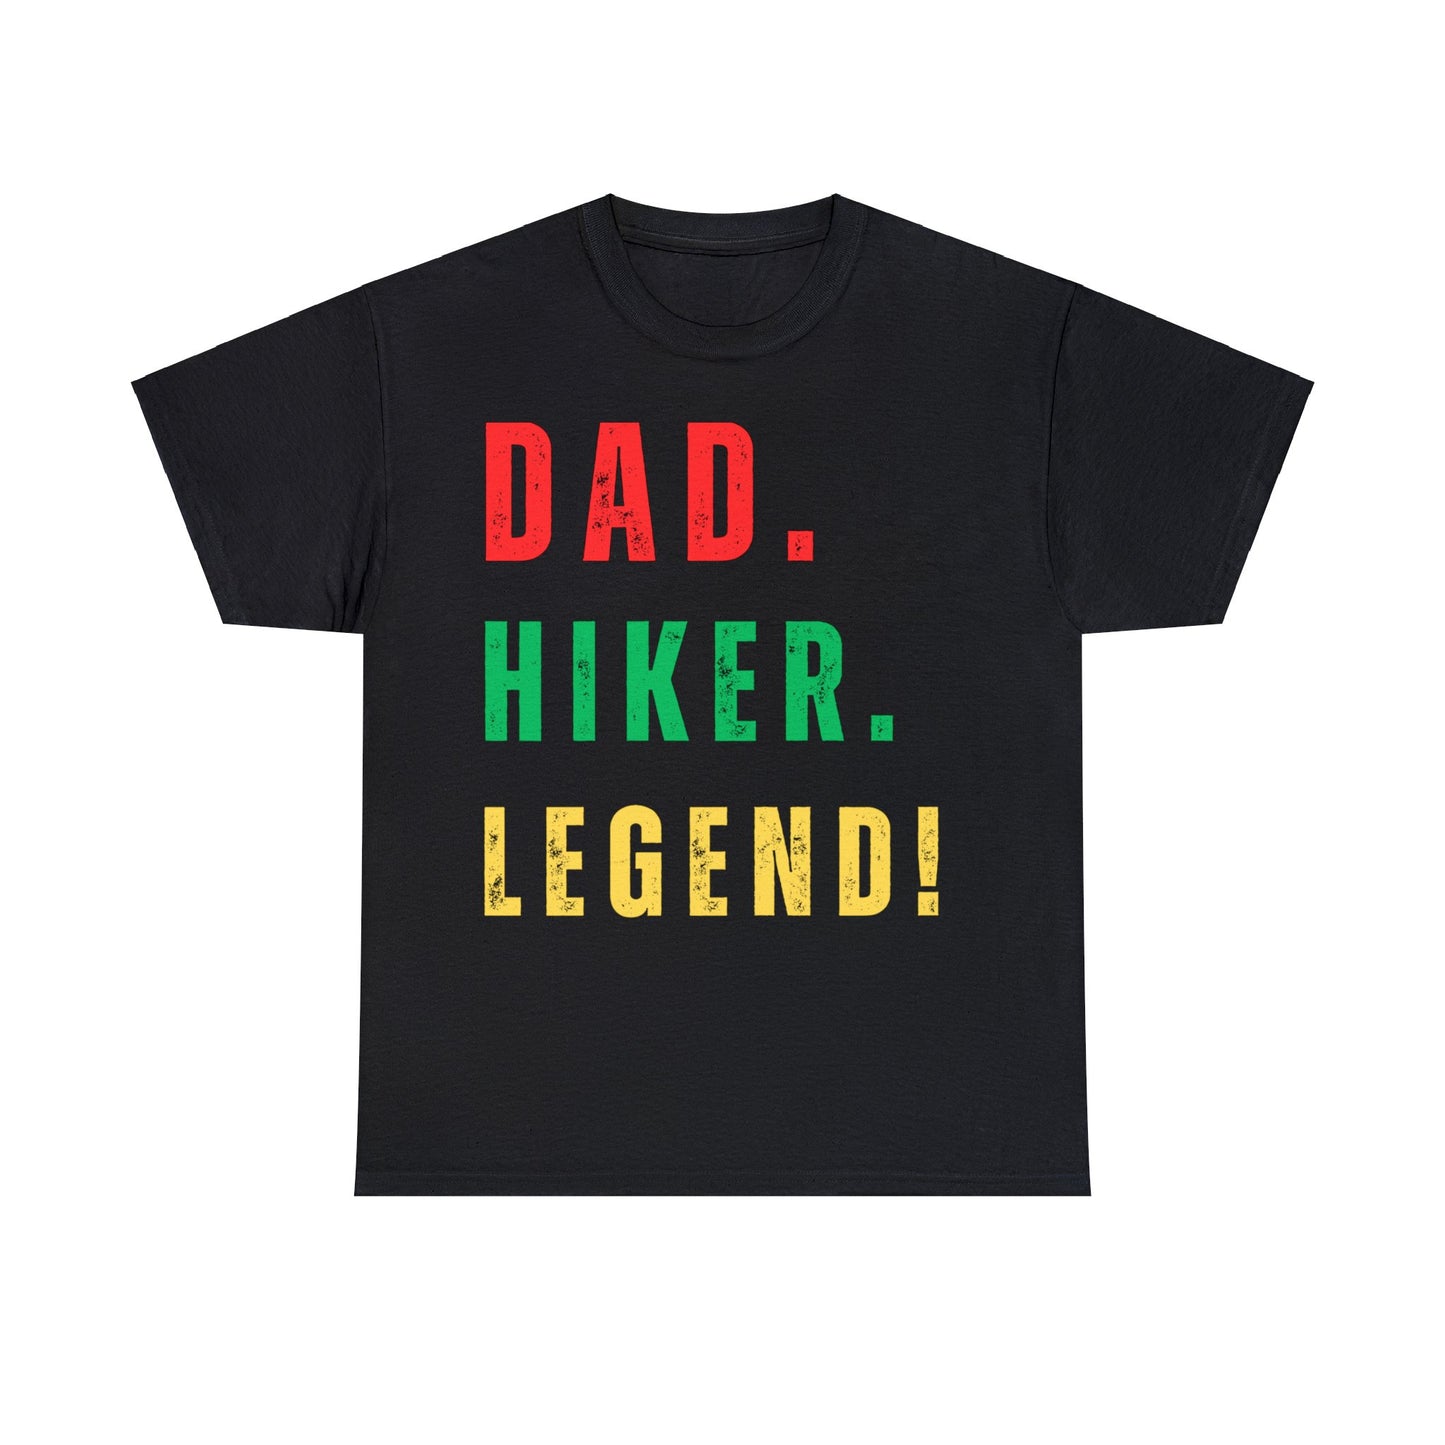 DAD. HIKER. LEGEND. T-Shirt - NOT SOLD IN STORES - Father's Day, Birthday, Valentine's Day, Christmas, Hiker, Hiking Lover, Gift for Hiker